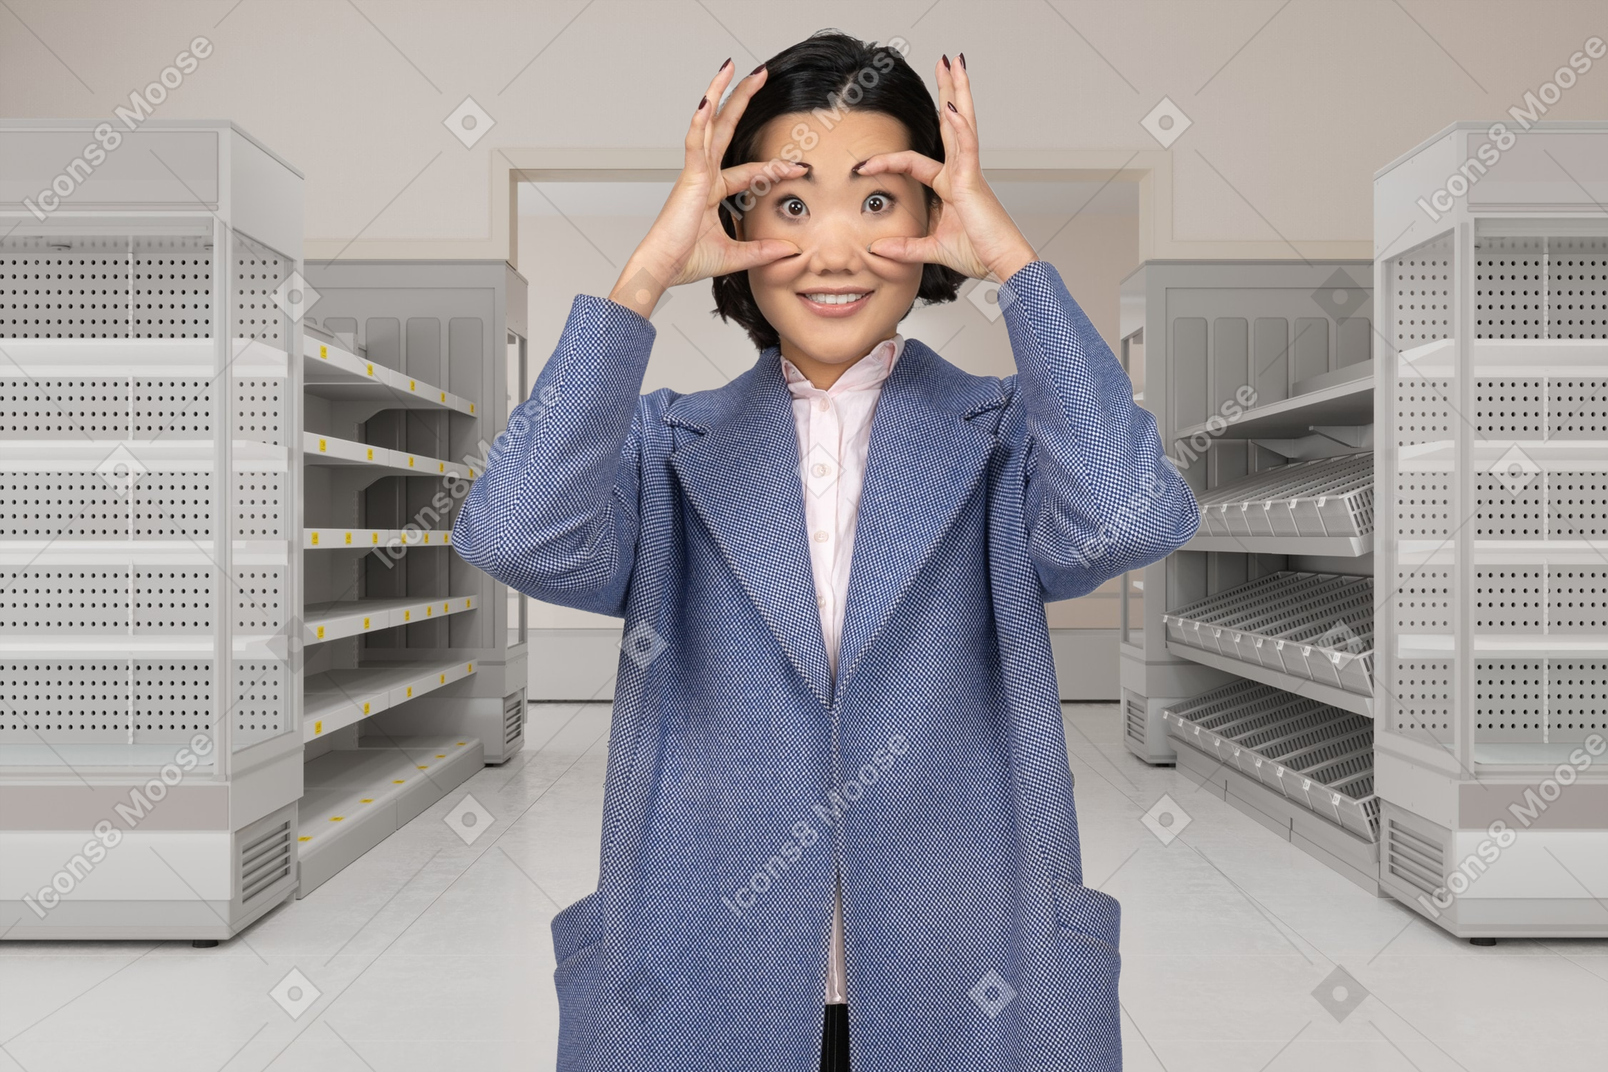 A woman holding eyes wide open with fingers in an empty supermarket